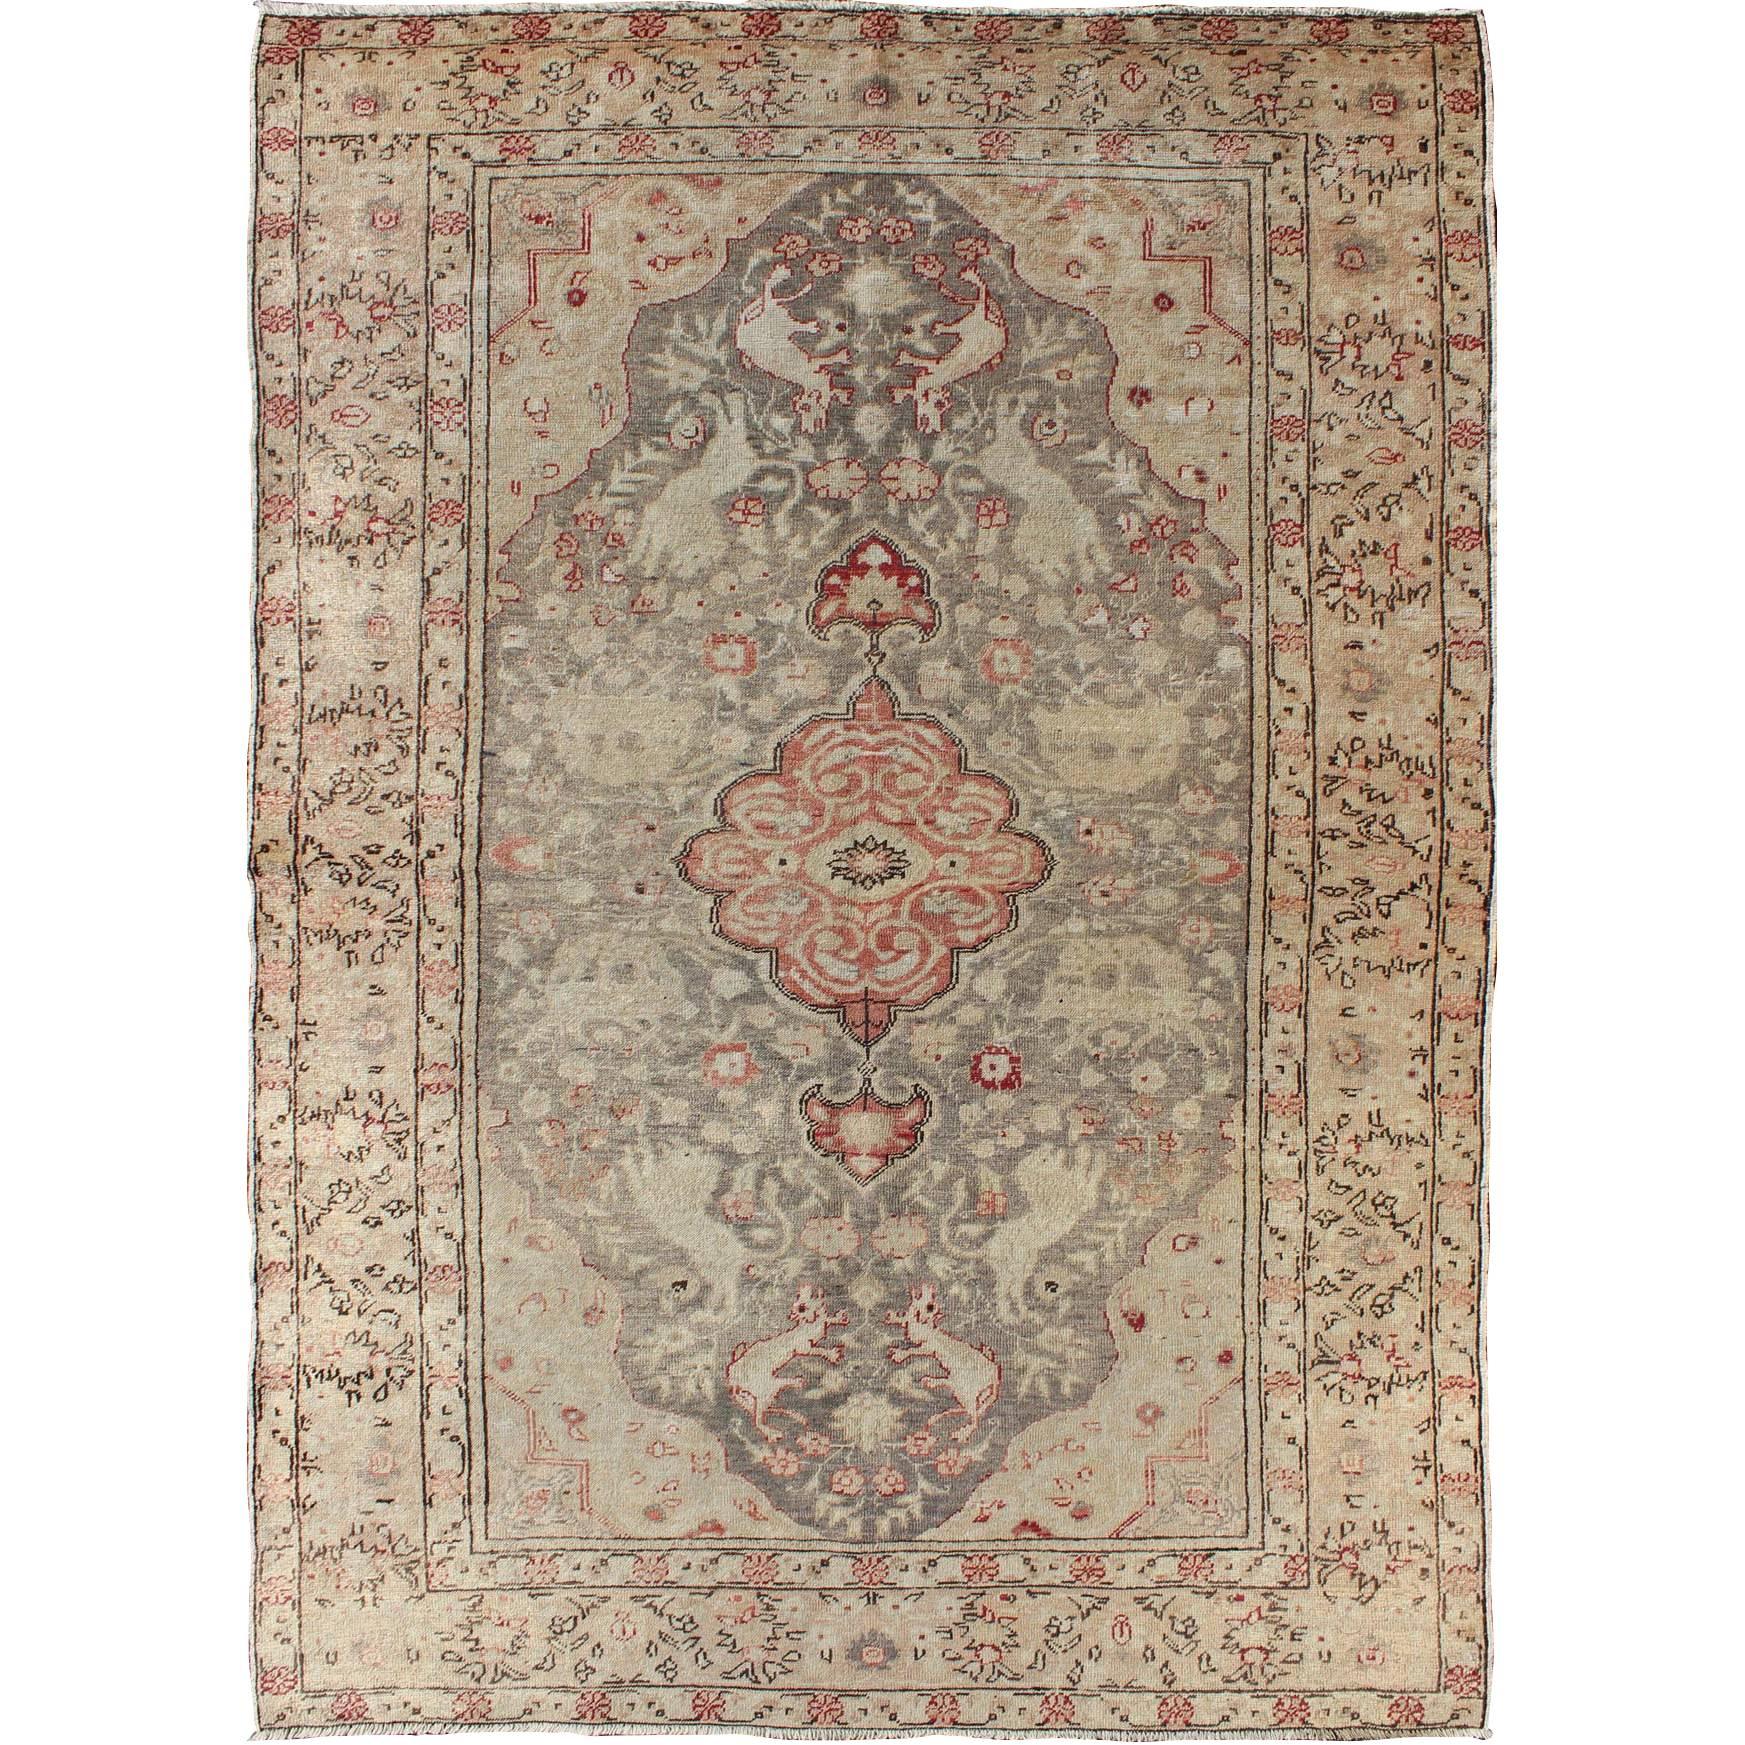 Fine Turkish Oushak Carpet with Floral Motifs in Cream, Pink & Red on Gray Field